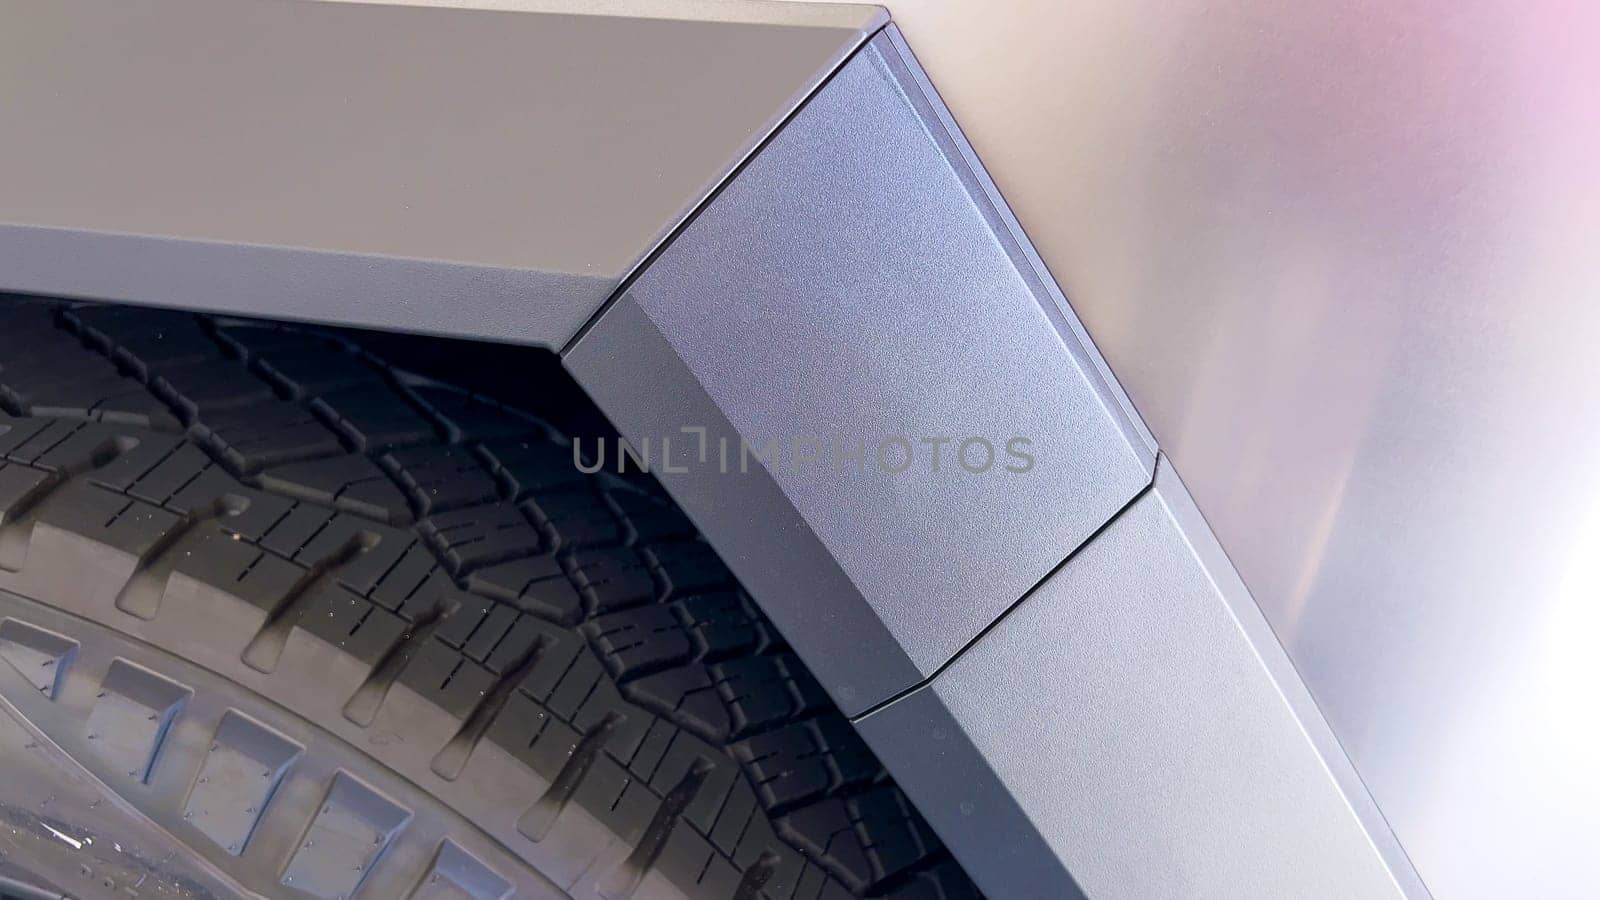 Detailed View of Tesla Cybertruck’s Angular Design and Textured Surface by arinahabich